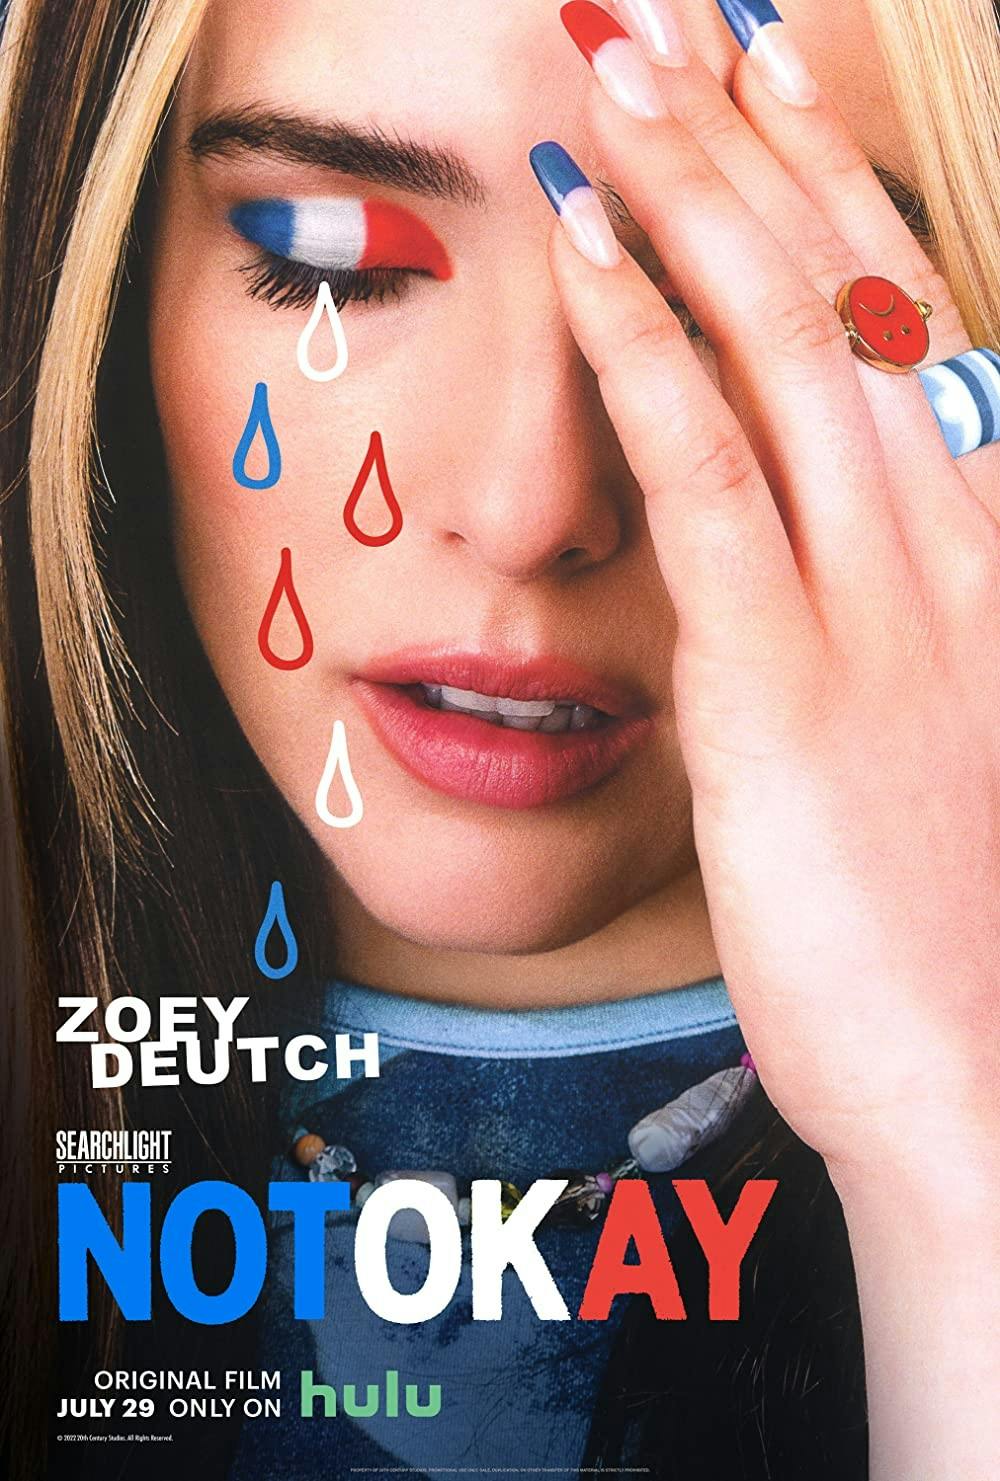 Review: ‘Not Okay’ is a social media satire film